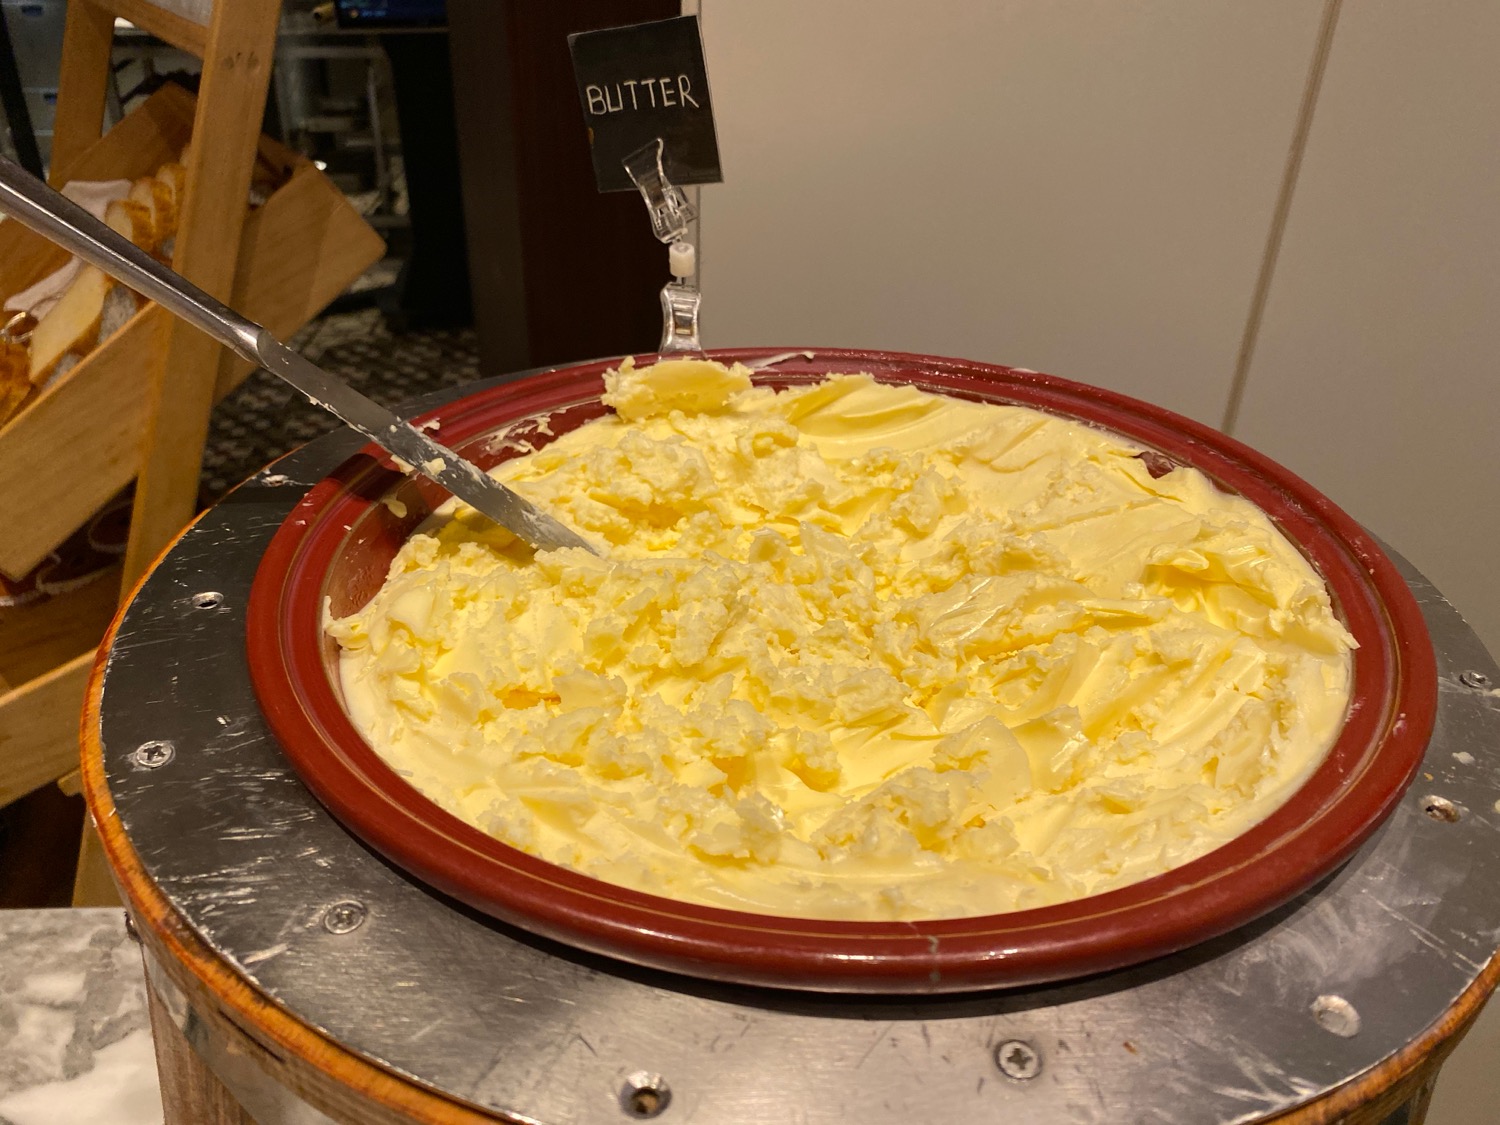 a bowl of butter on a table